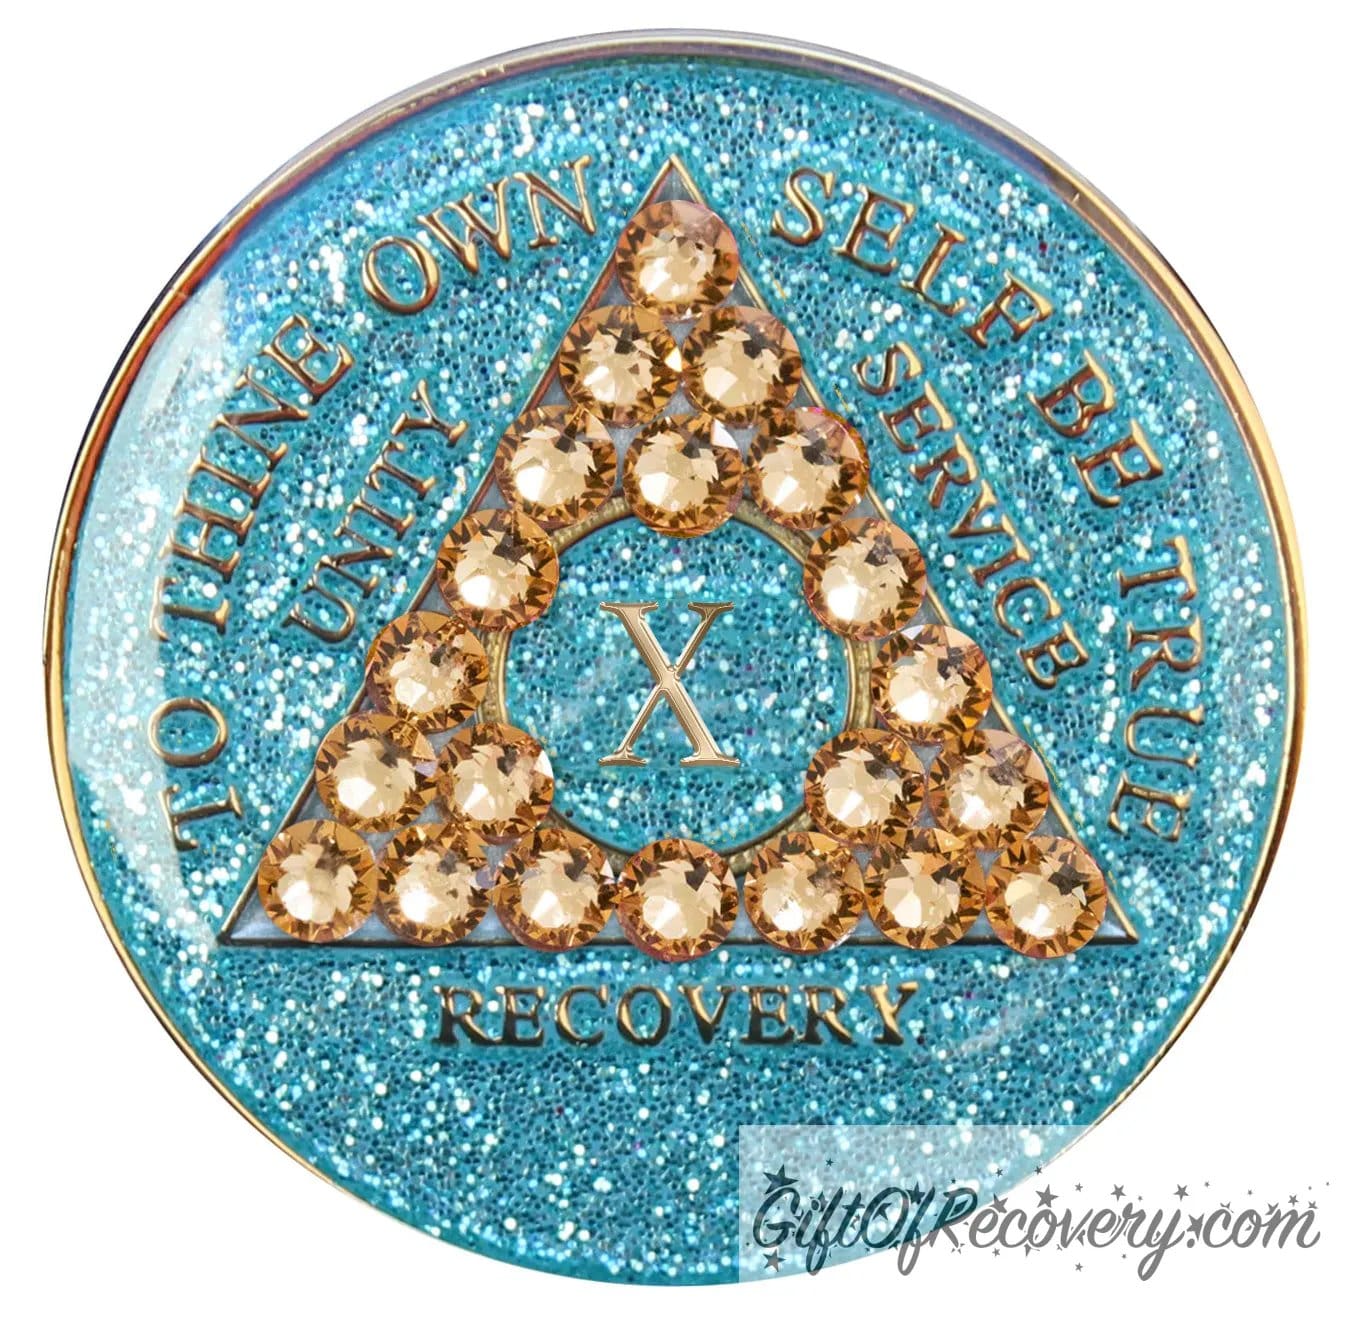 10 year Aqua glitter AA medallion with 21 gold genuine crystal making a triangle in the center, and to thine own self be true, unity, service, recovery, the roman numeral in the center and the rim of the recovery medallion embossed in 14k gold plated brass and sealed with resin for a glossy shine.